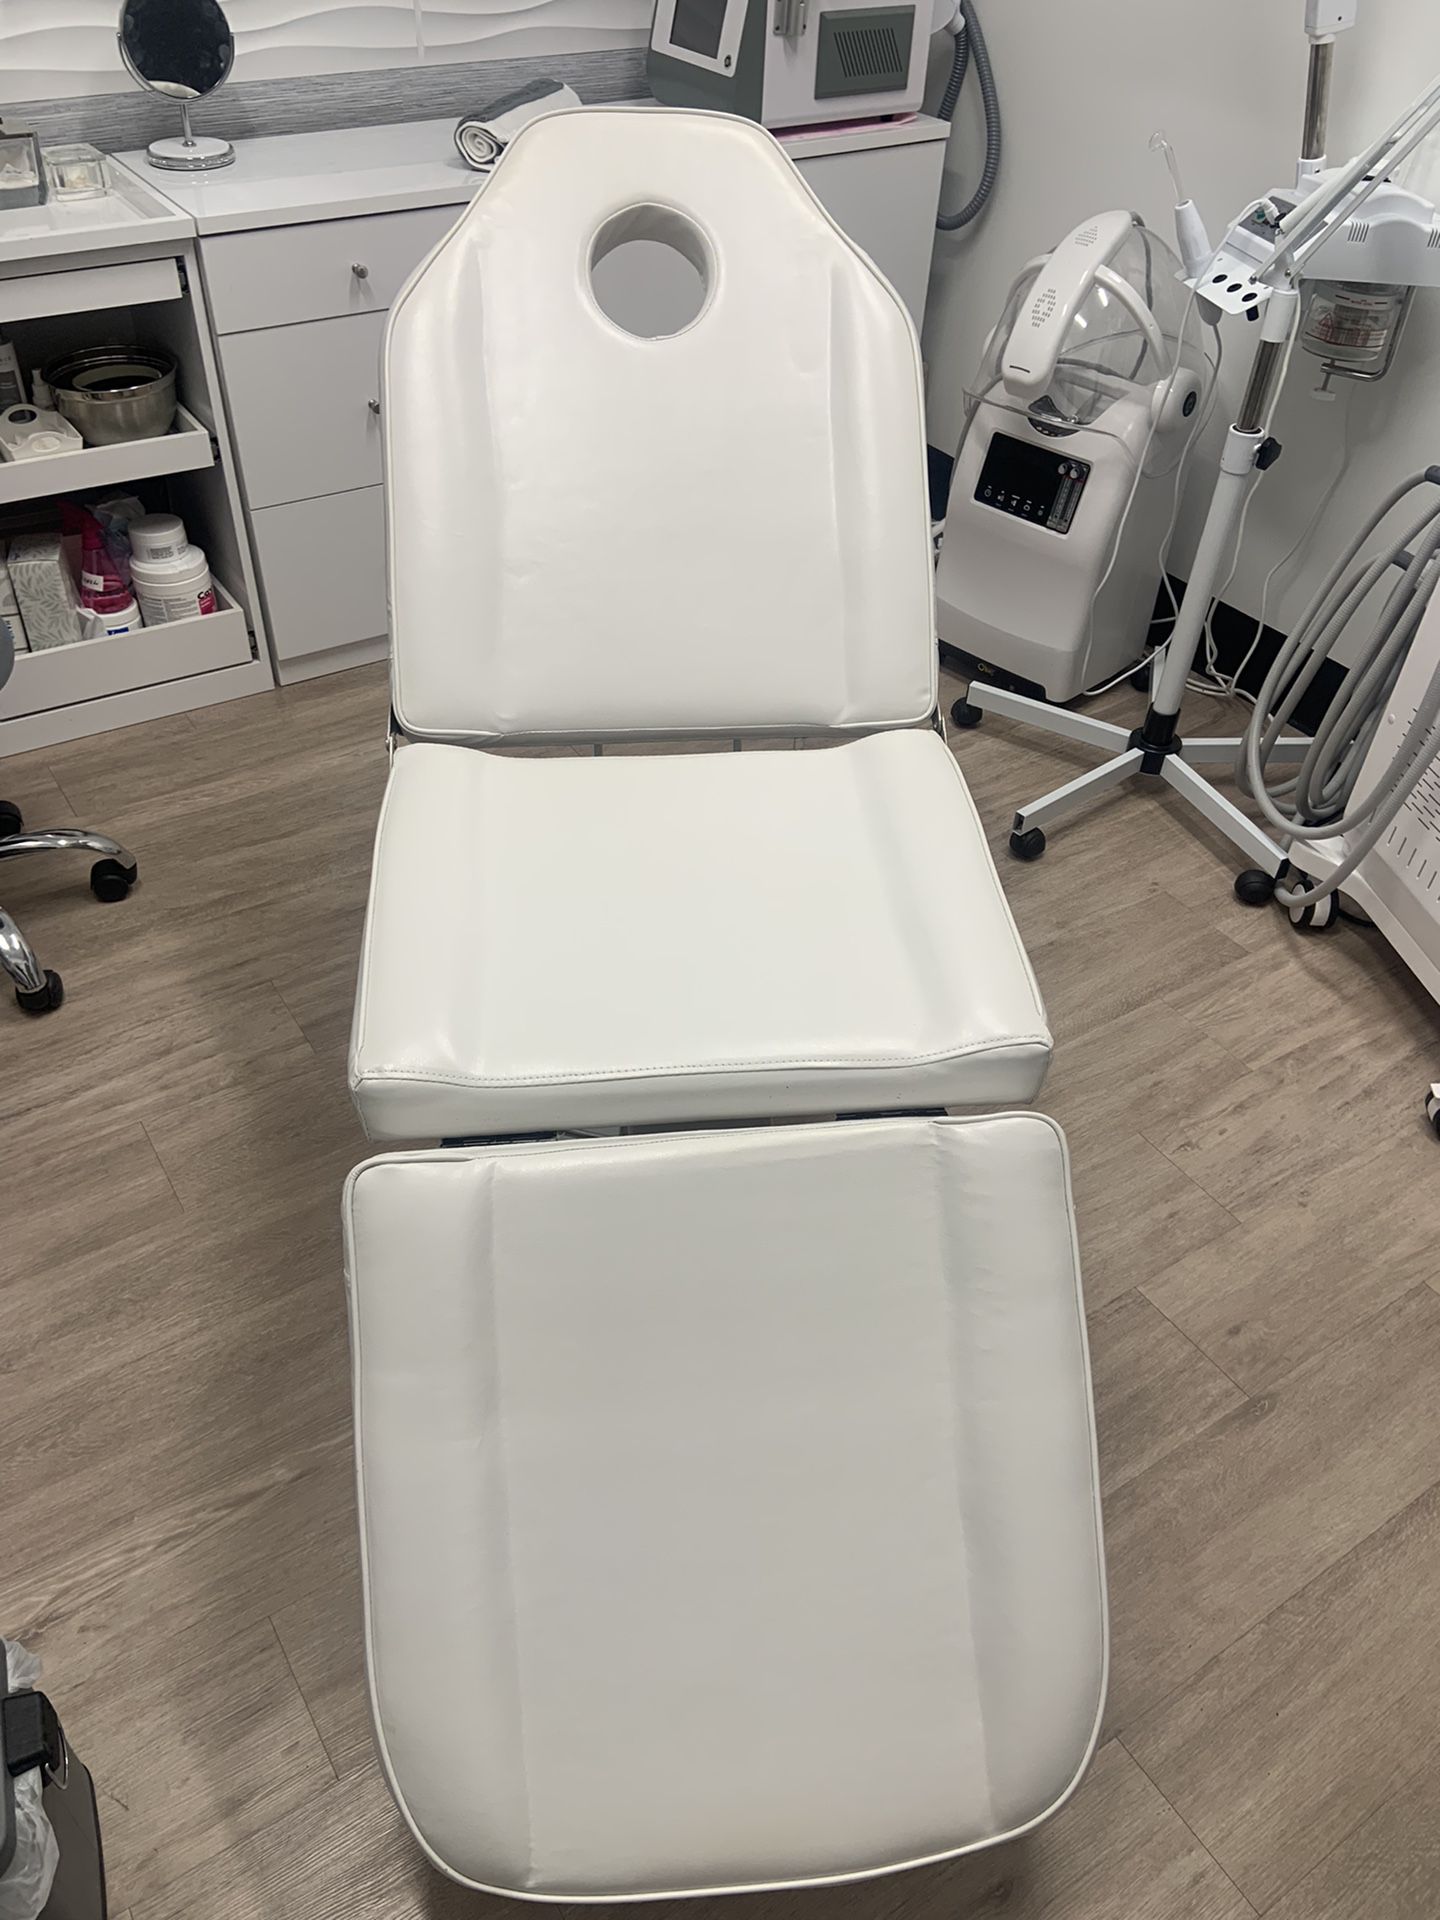  Esthetician Bed  / Tattoo  Chair 